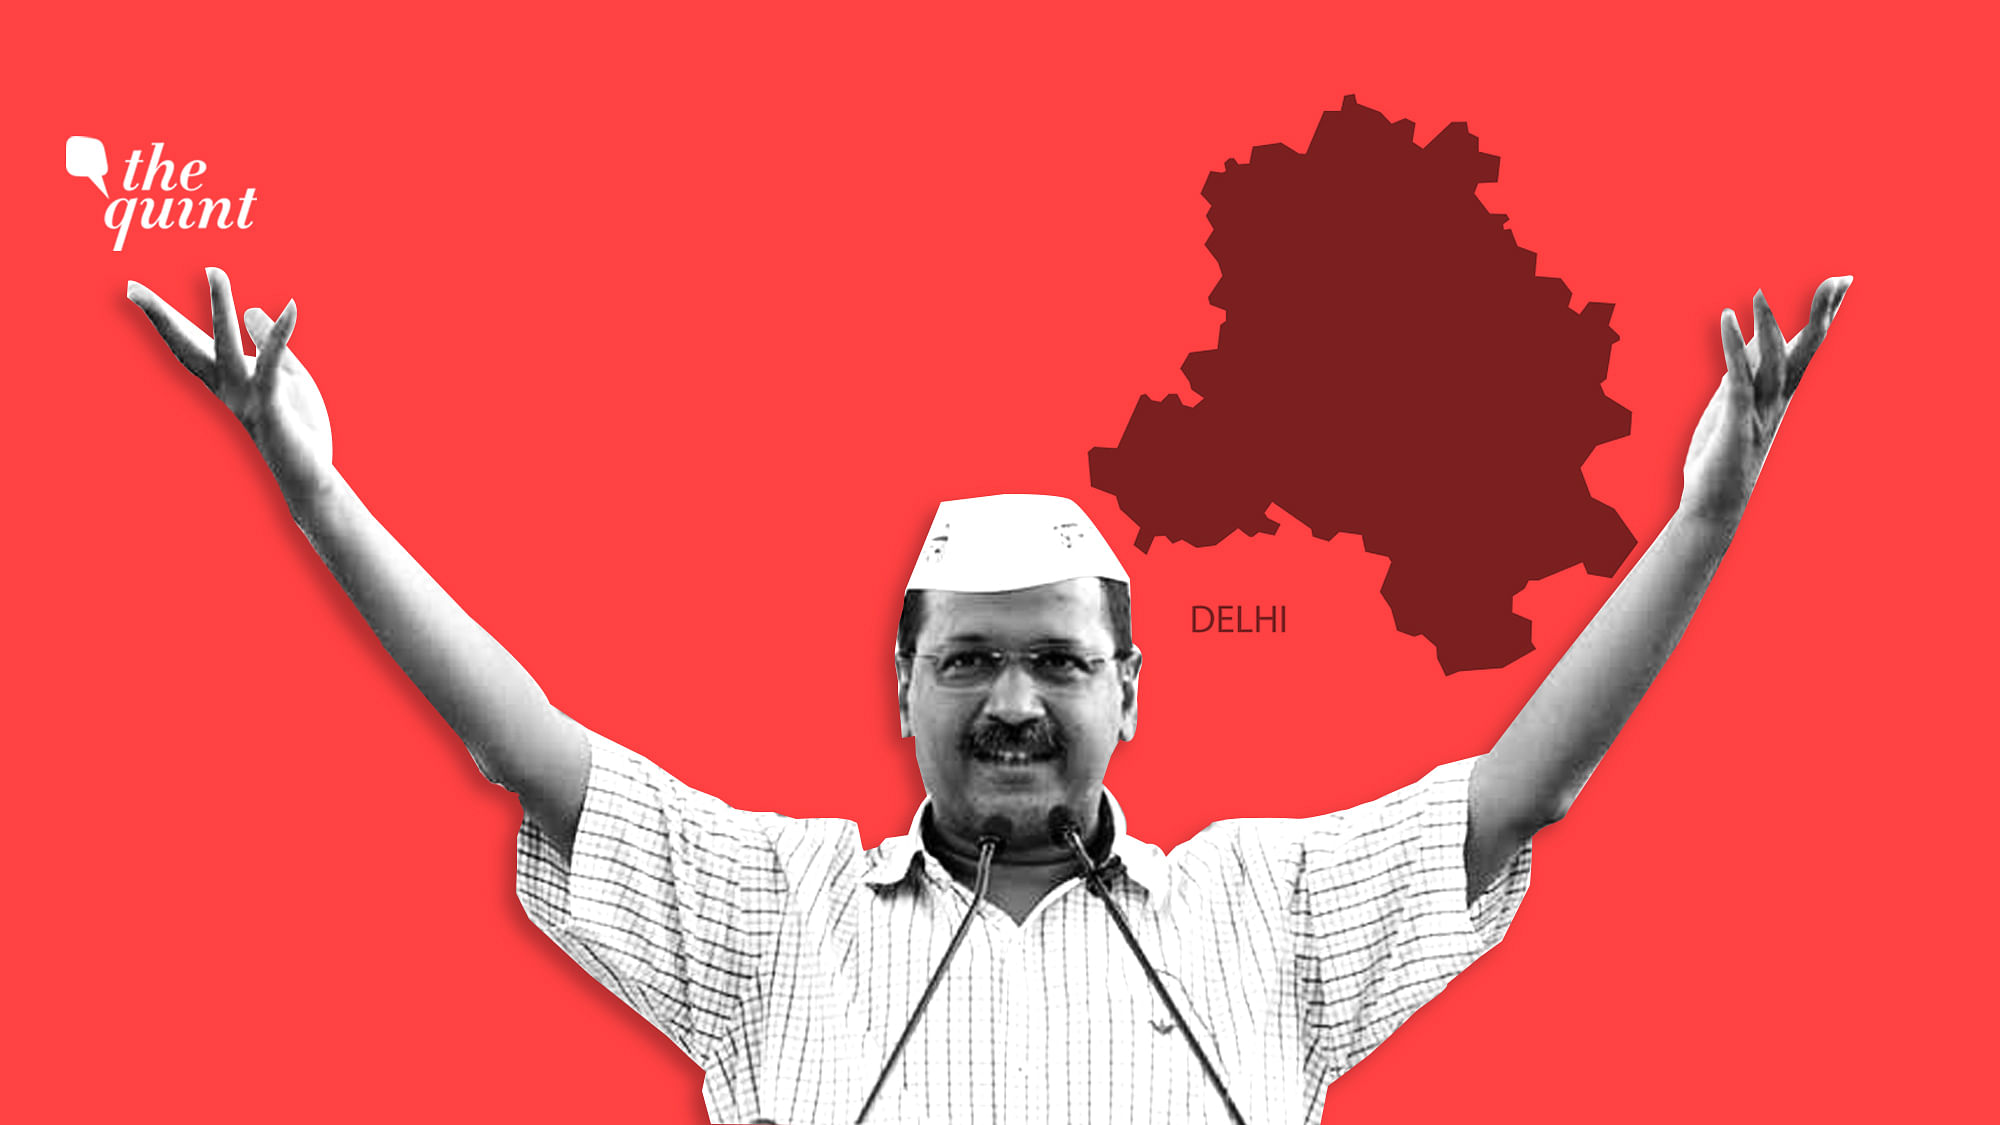 CVoter election tracker shows Arvind Kejriwal’s AAP has a lead over BJP in the Delhi Assembly Elections.